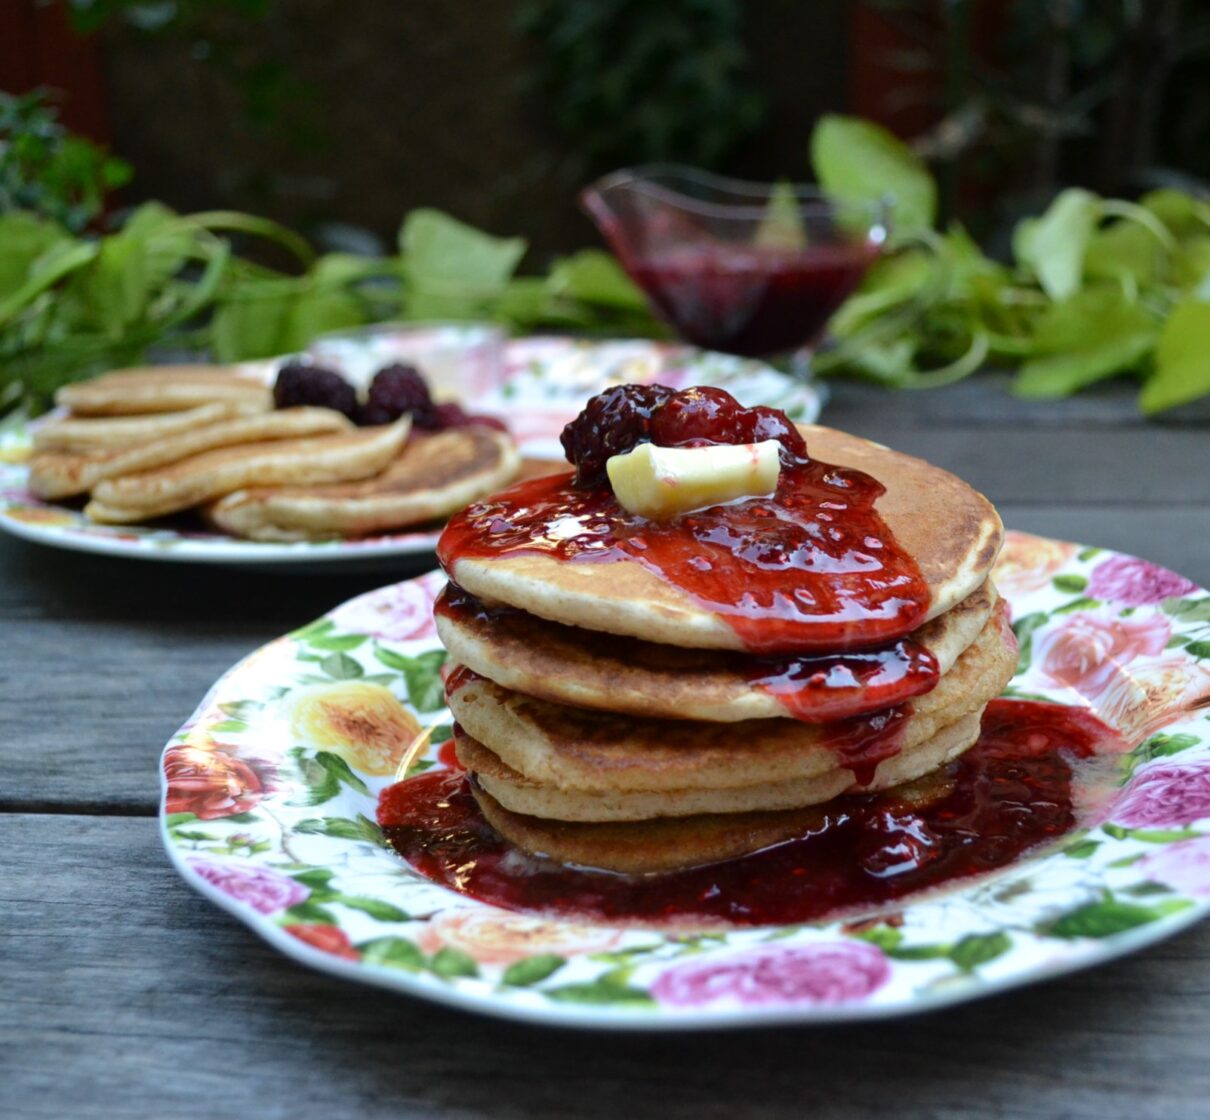 Whole Wheat Flour Pancakes With Mix Berry Sauce 全粒粉のパンケーキミックスベリーソース添え Us Southern Kitchen